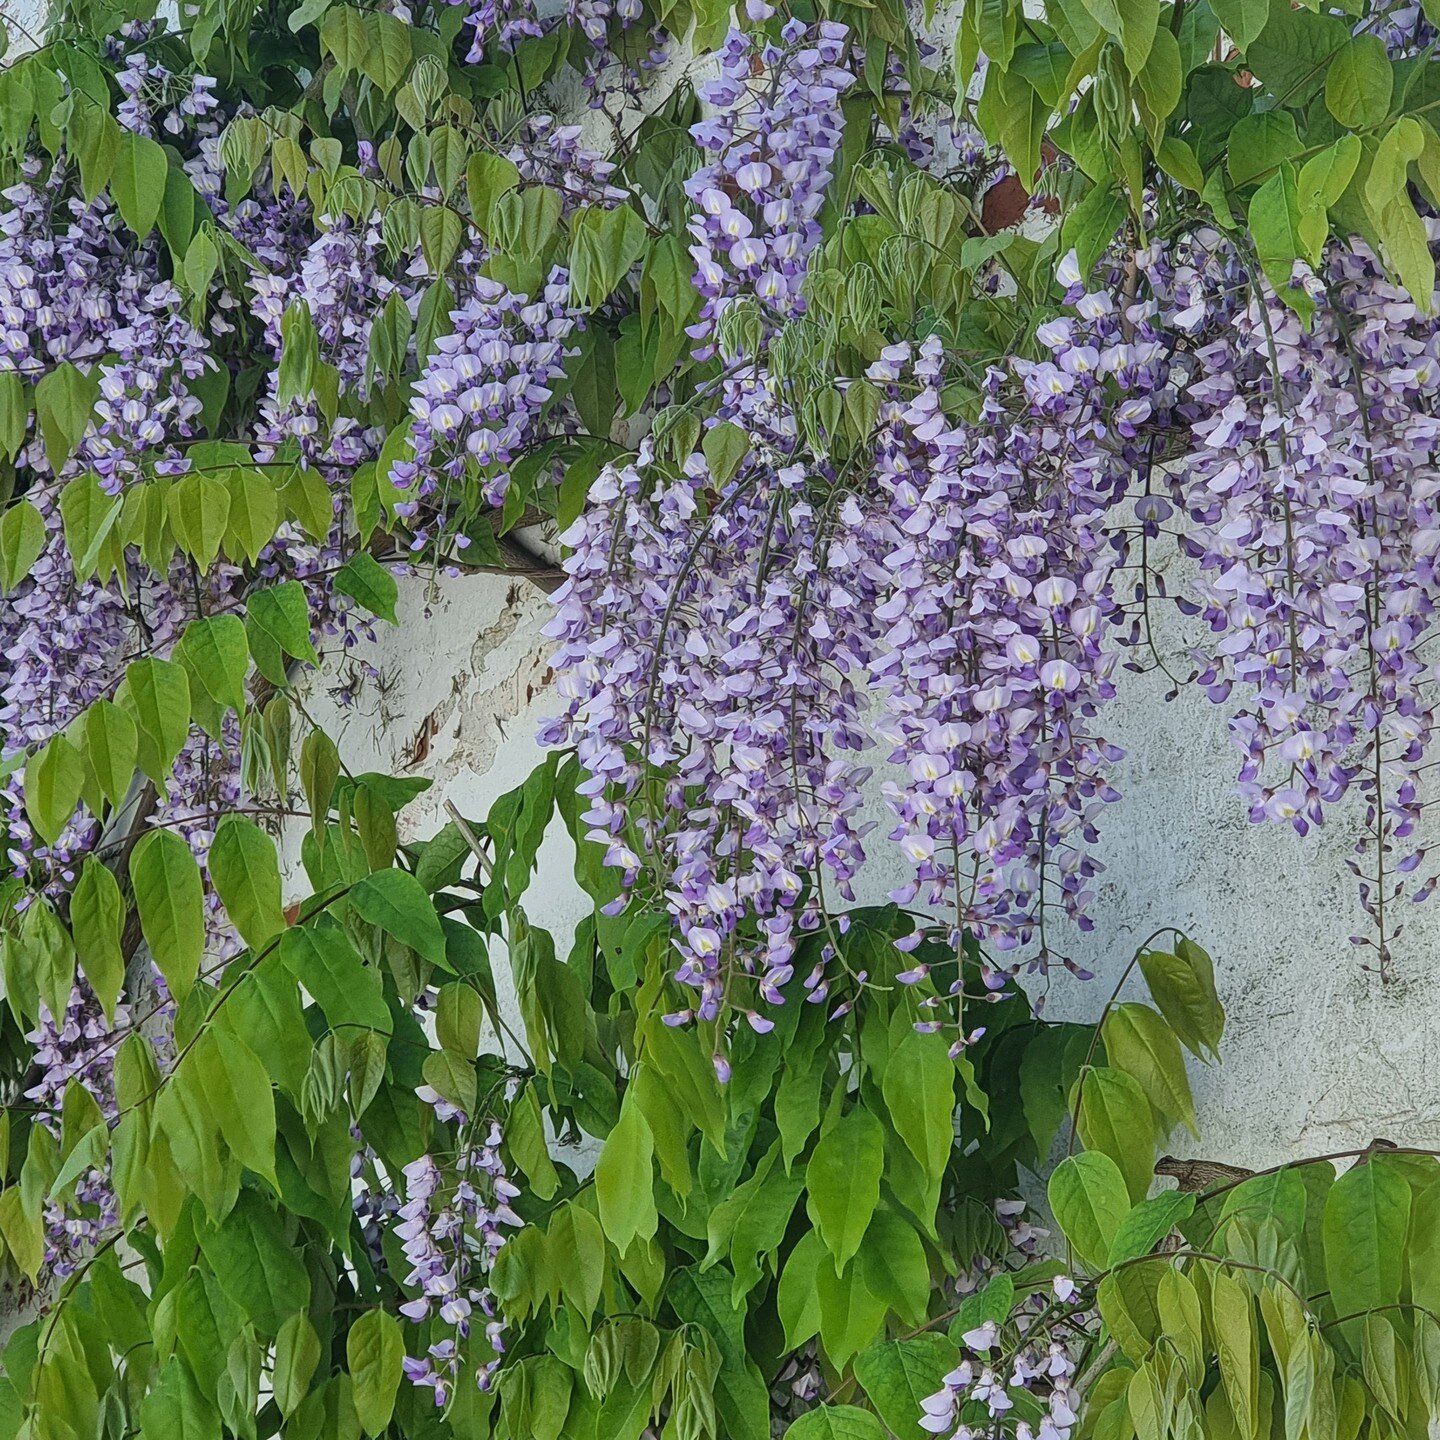 Wisteria renovation! A few years ago this wisteria was in a pretty grim state. A massive, undefined blob, encroaching on the garden, few blooms and nothing but a mass of vegetation competing with ivy spread all over the wall.

We stripped the ivy bac